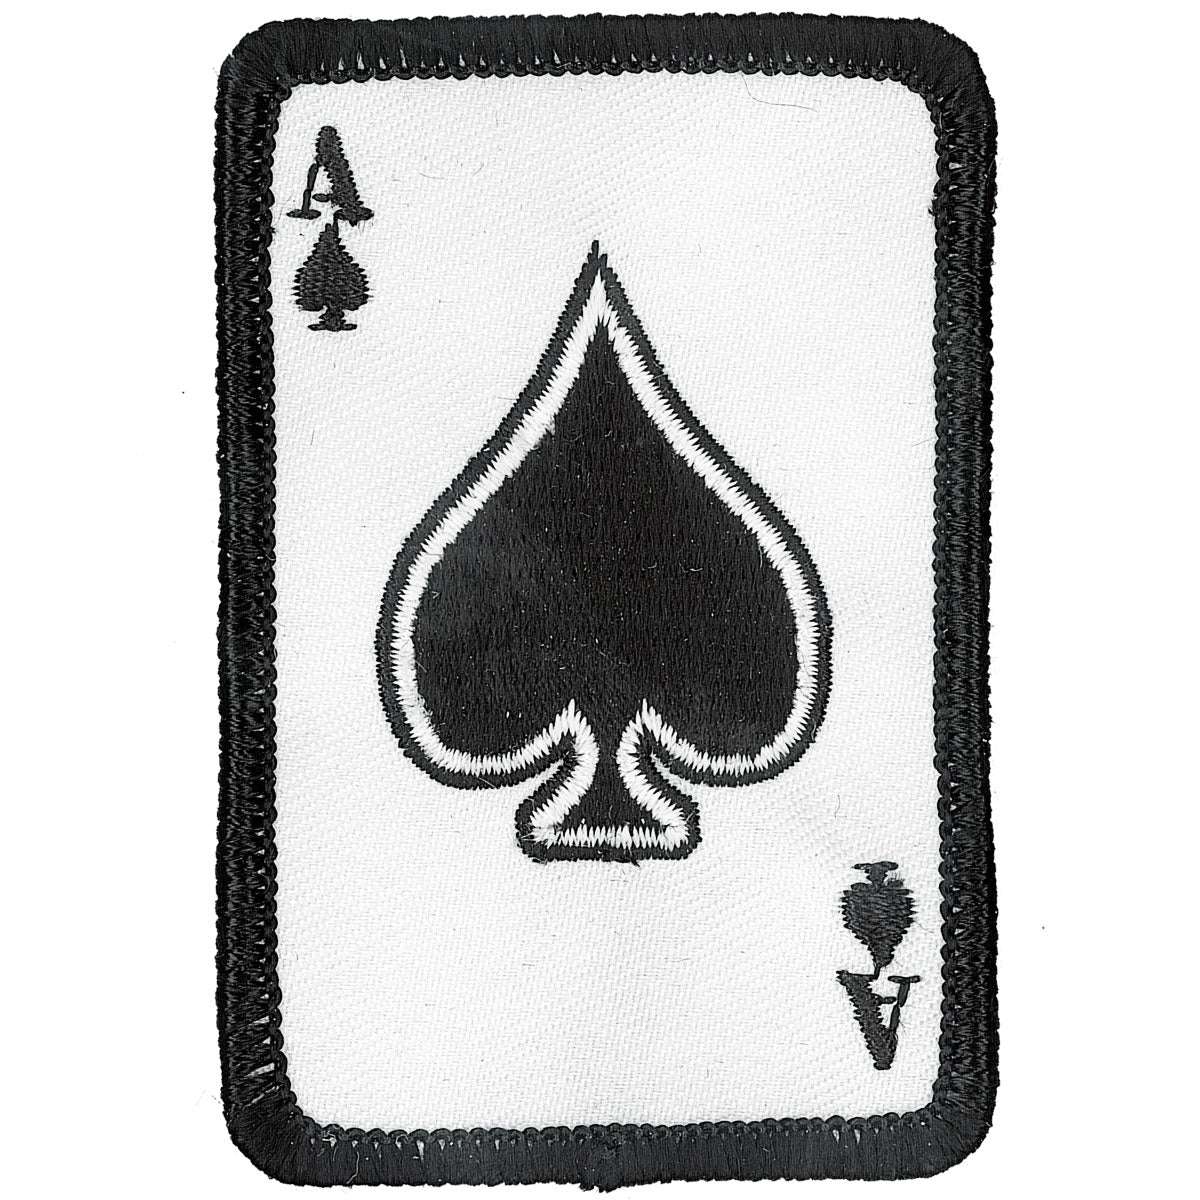 Hot Leathers Ace of Spades 2" x 3" Patch PPL9084